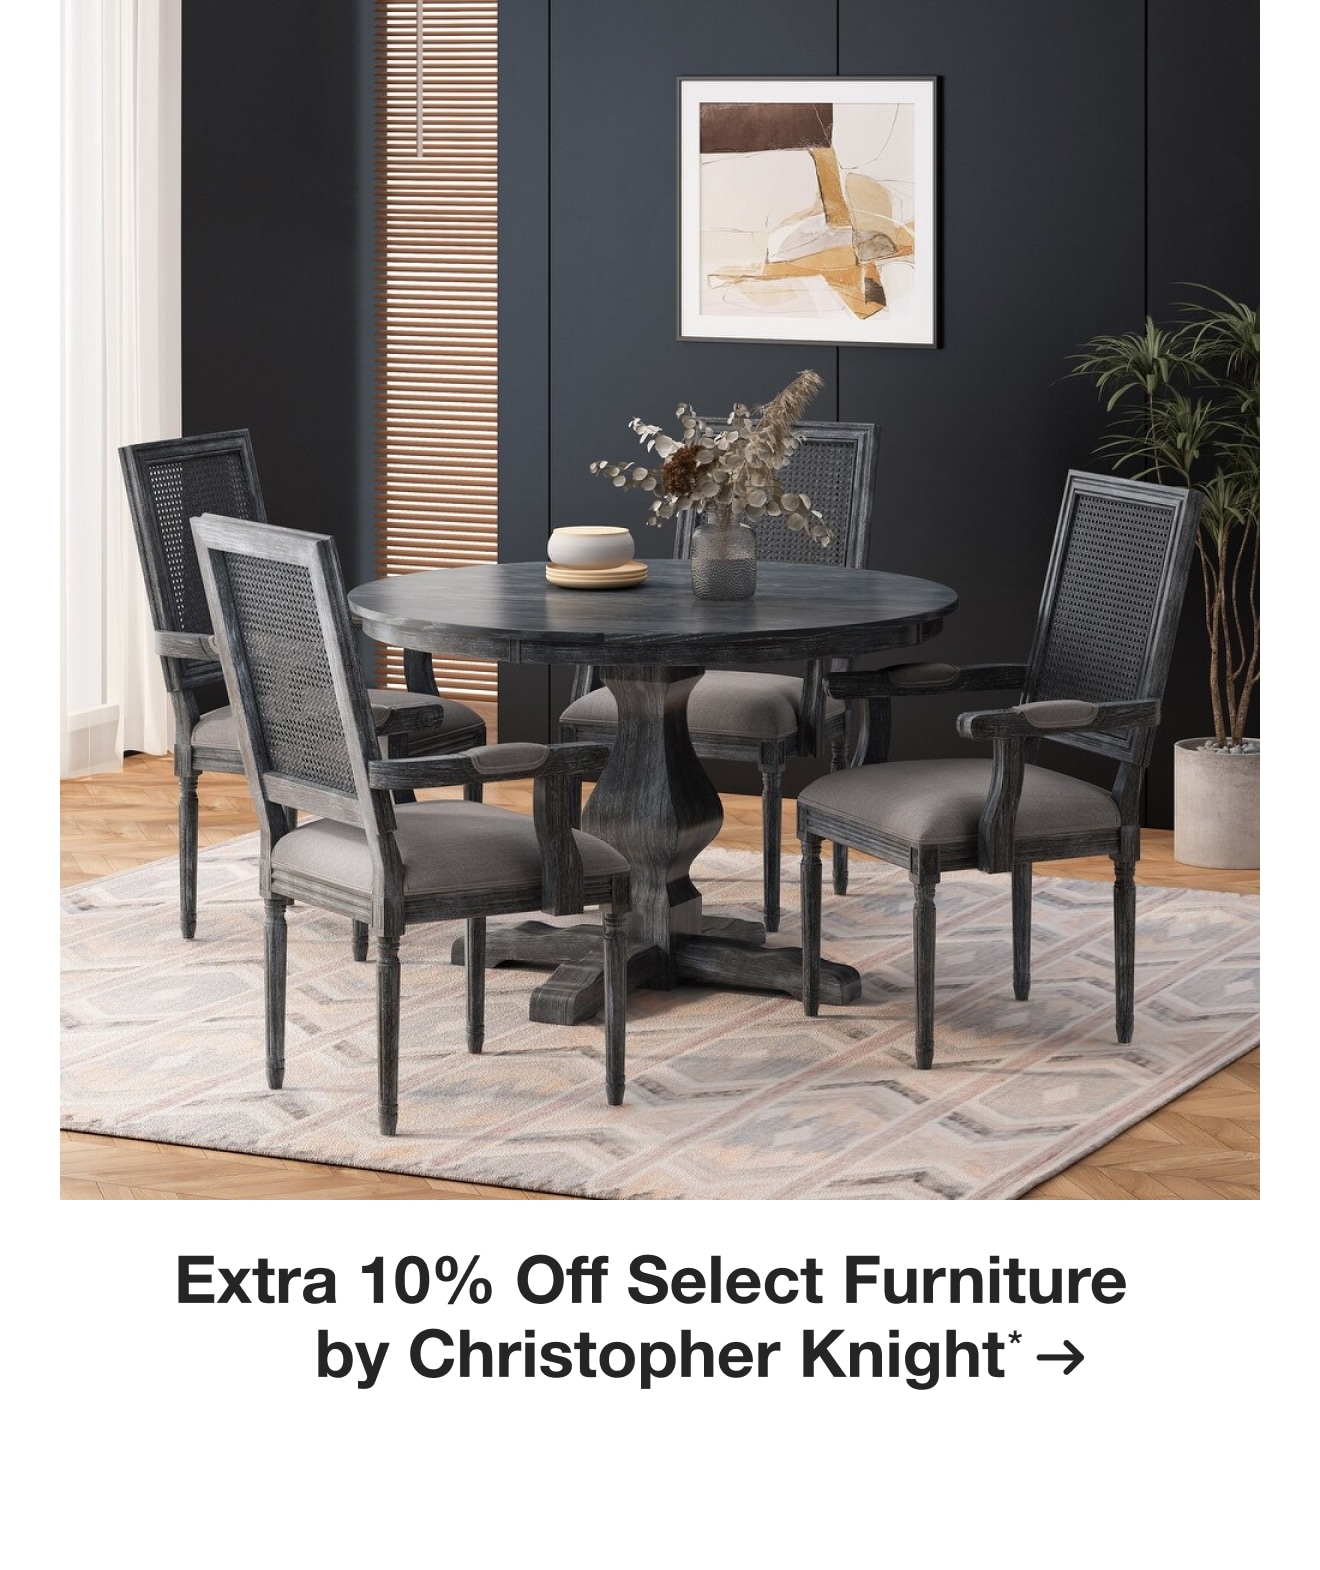 Extra 10% off Select Furniture by Christopher Knight*